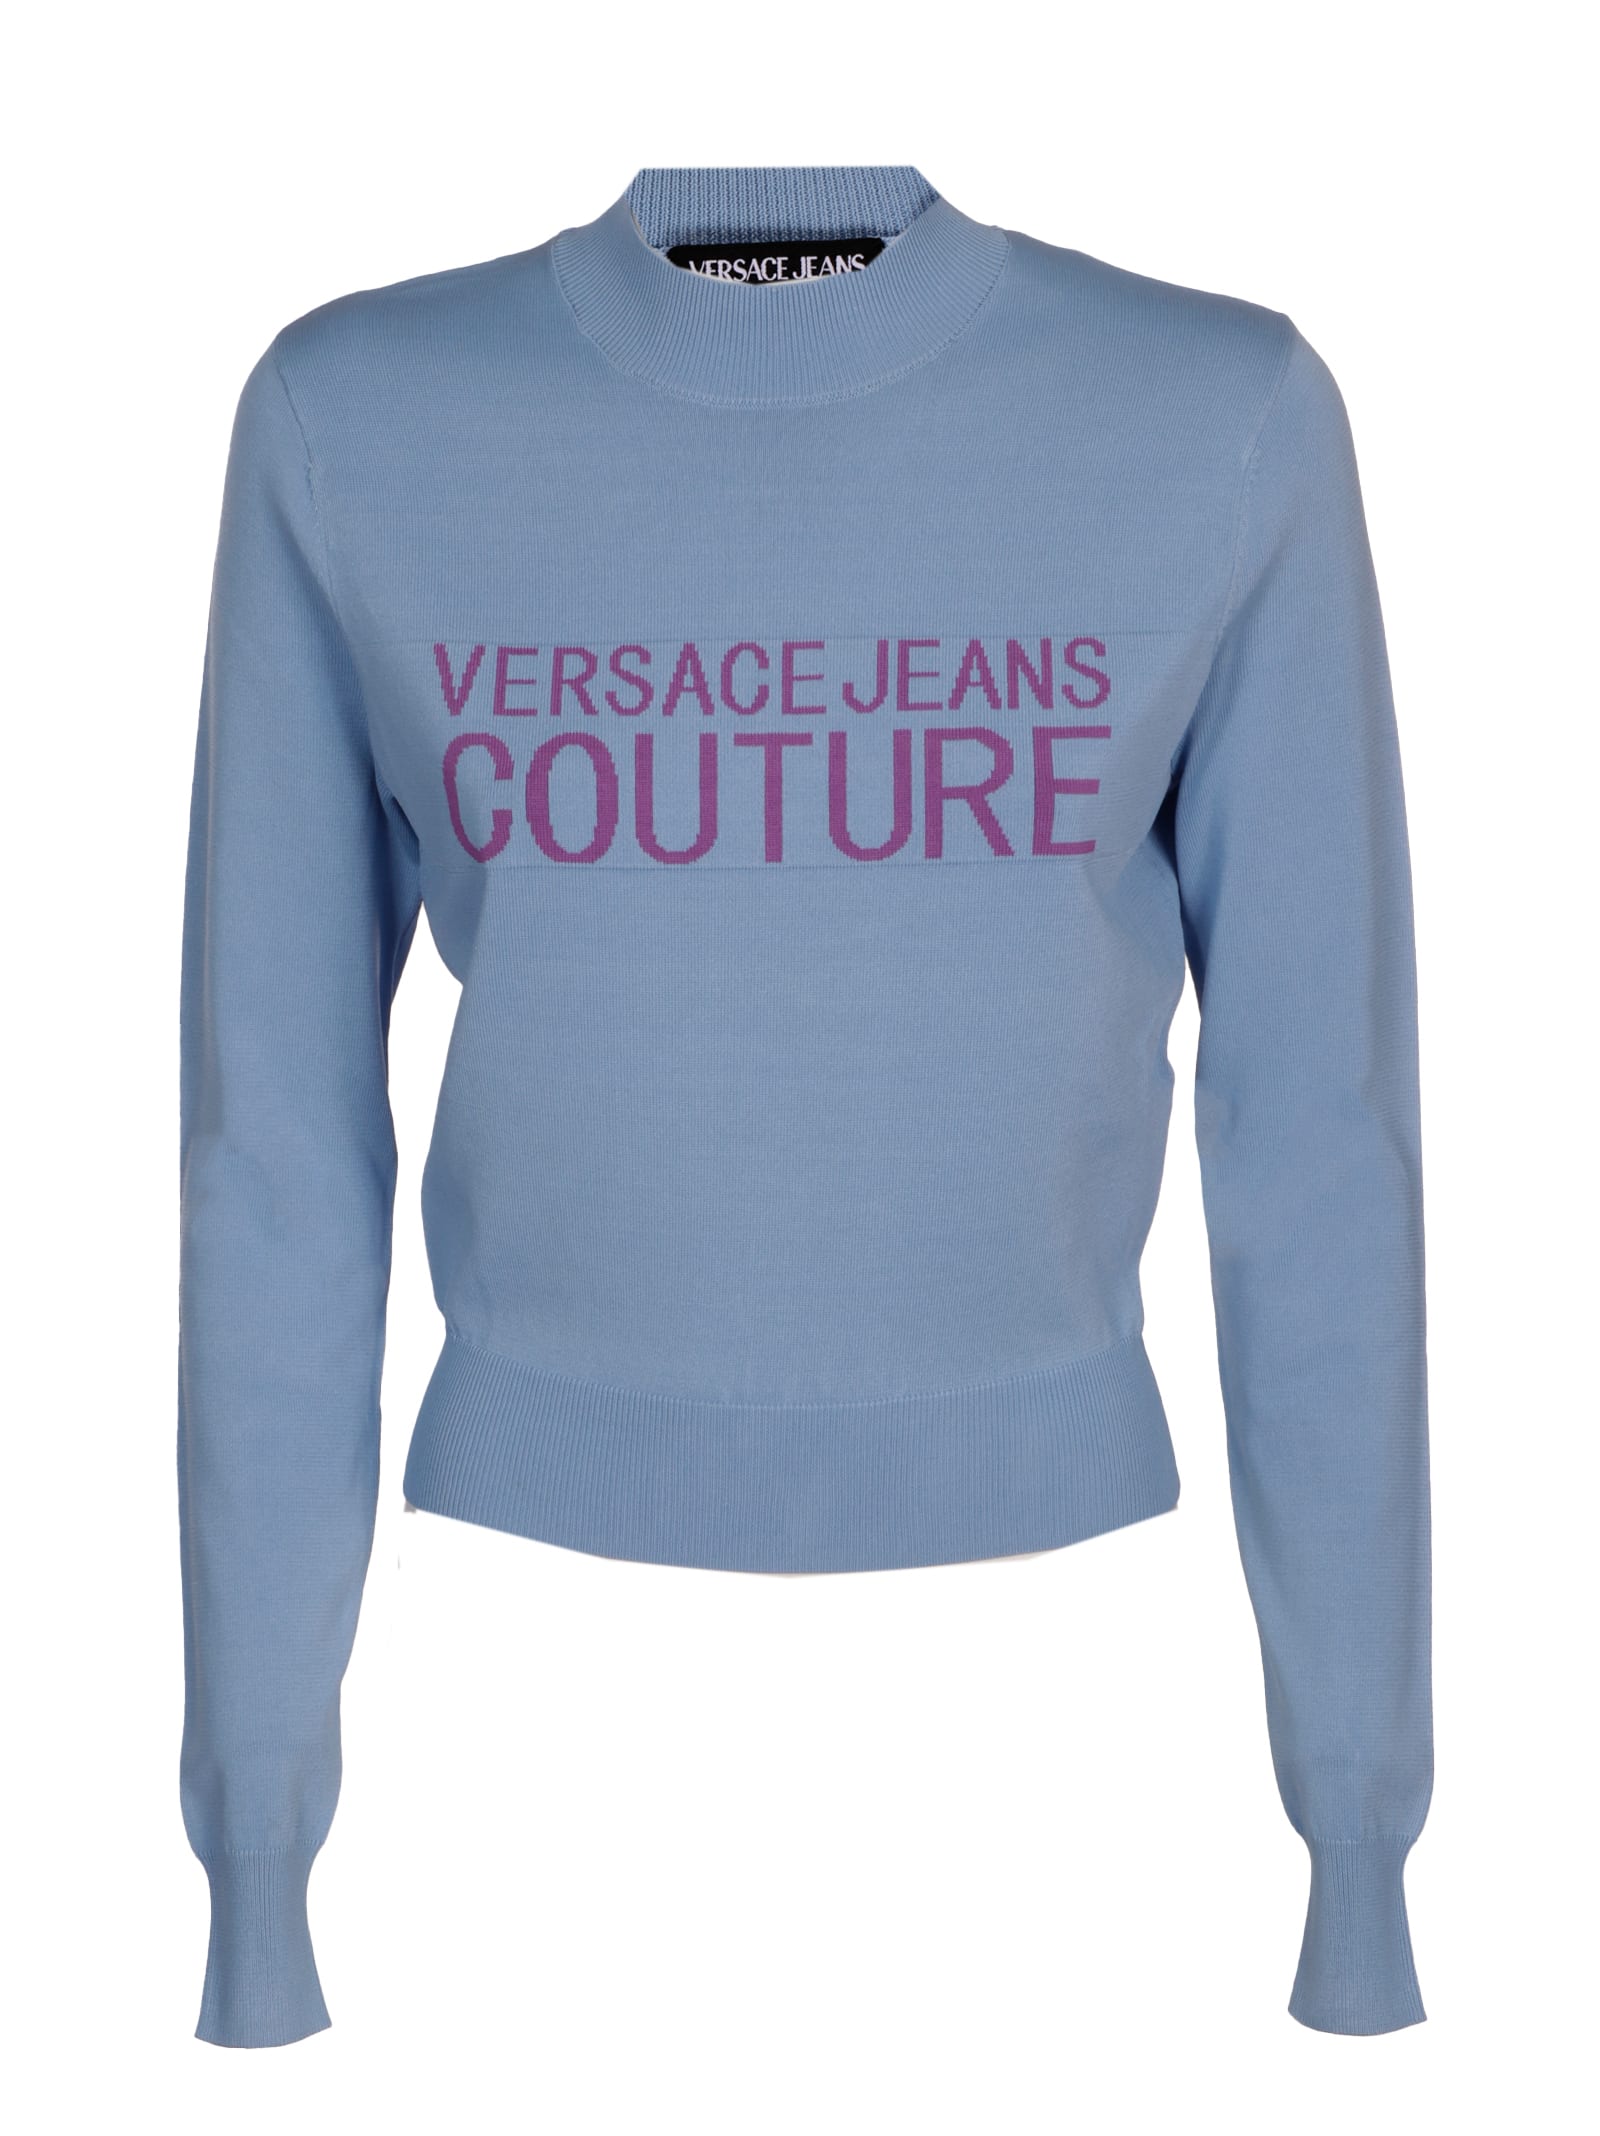 Versace Jeans Couture Logo Knitwear